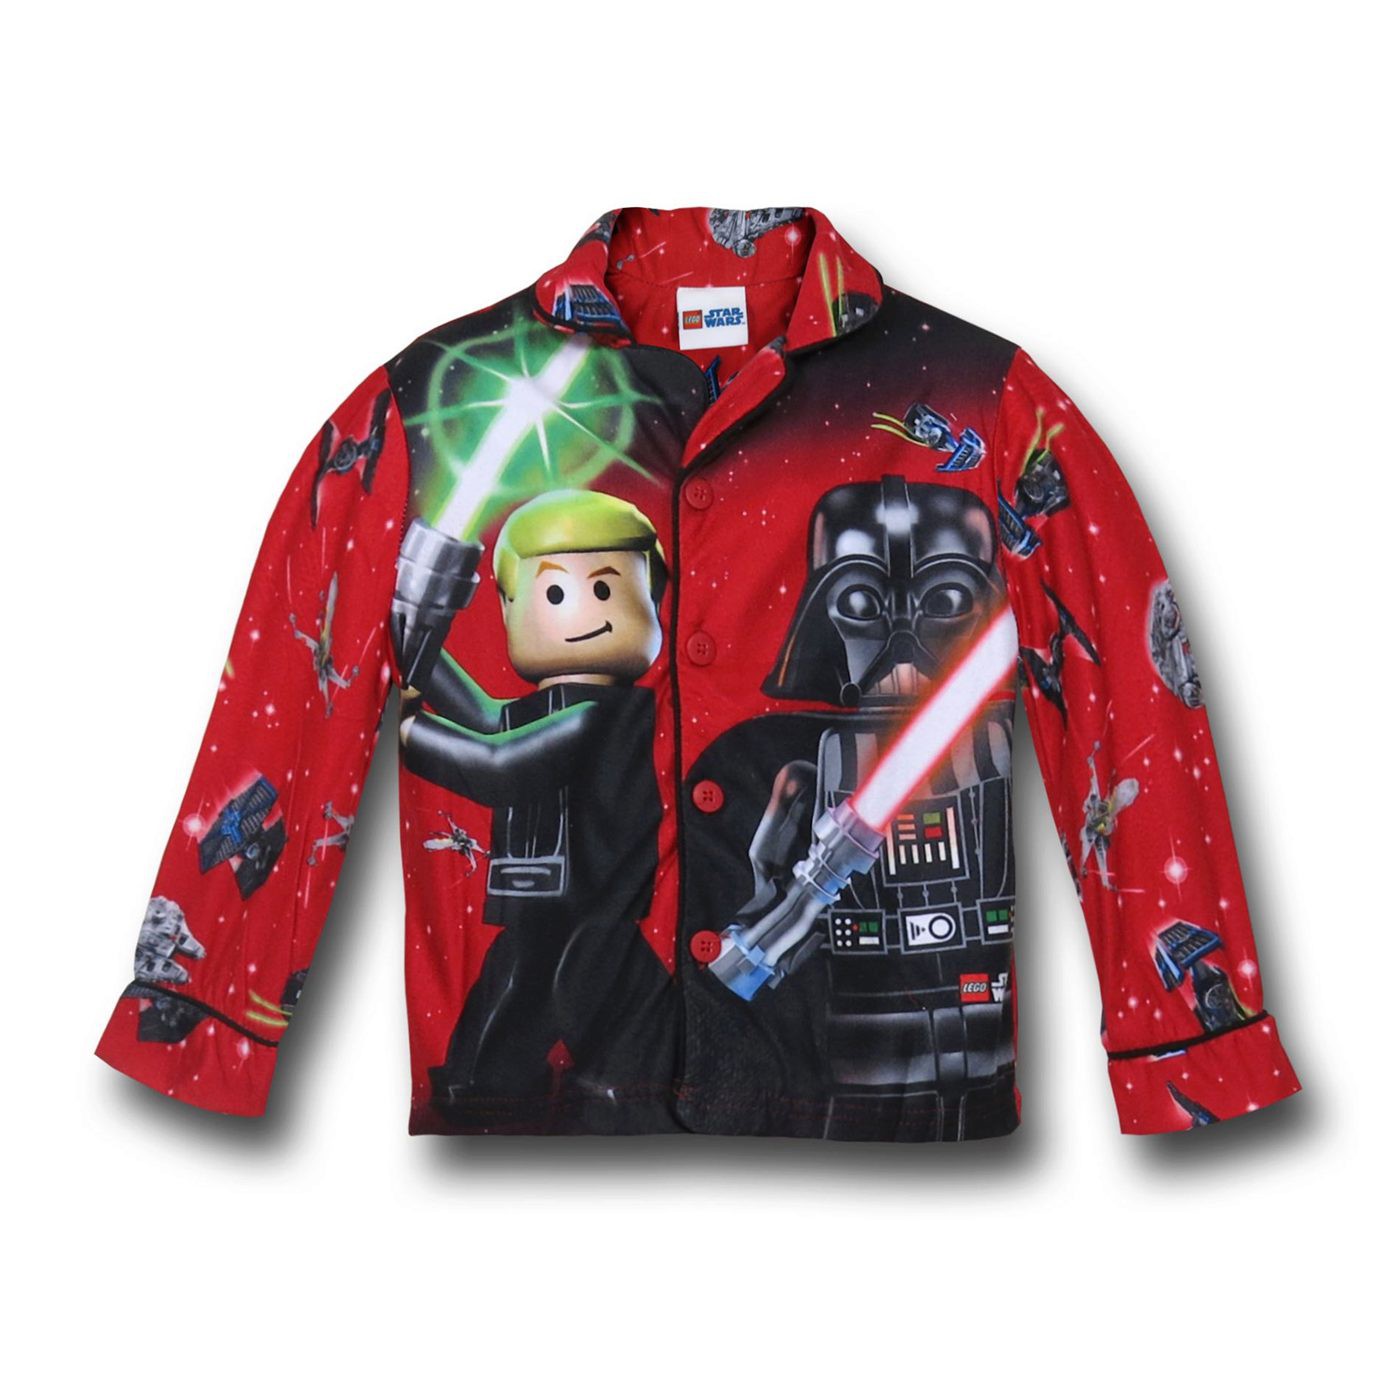 Star Wars Lego Red Button-Up Kids Pajamas